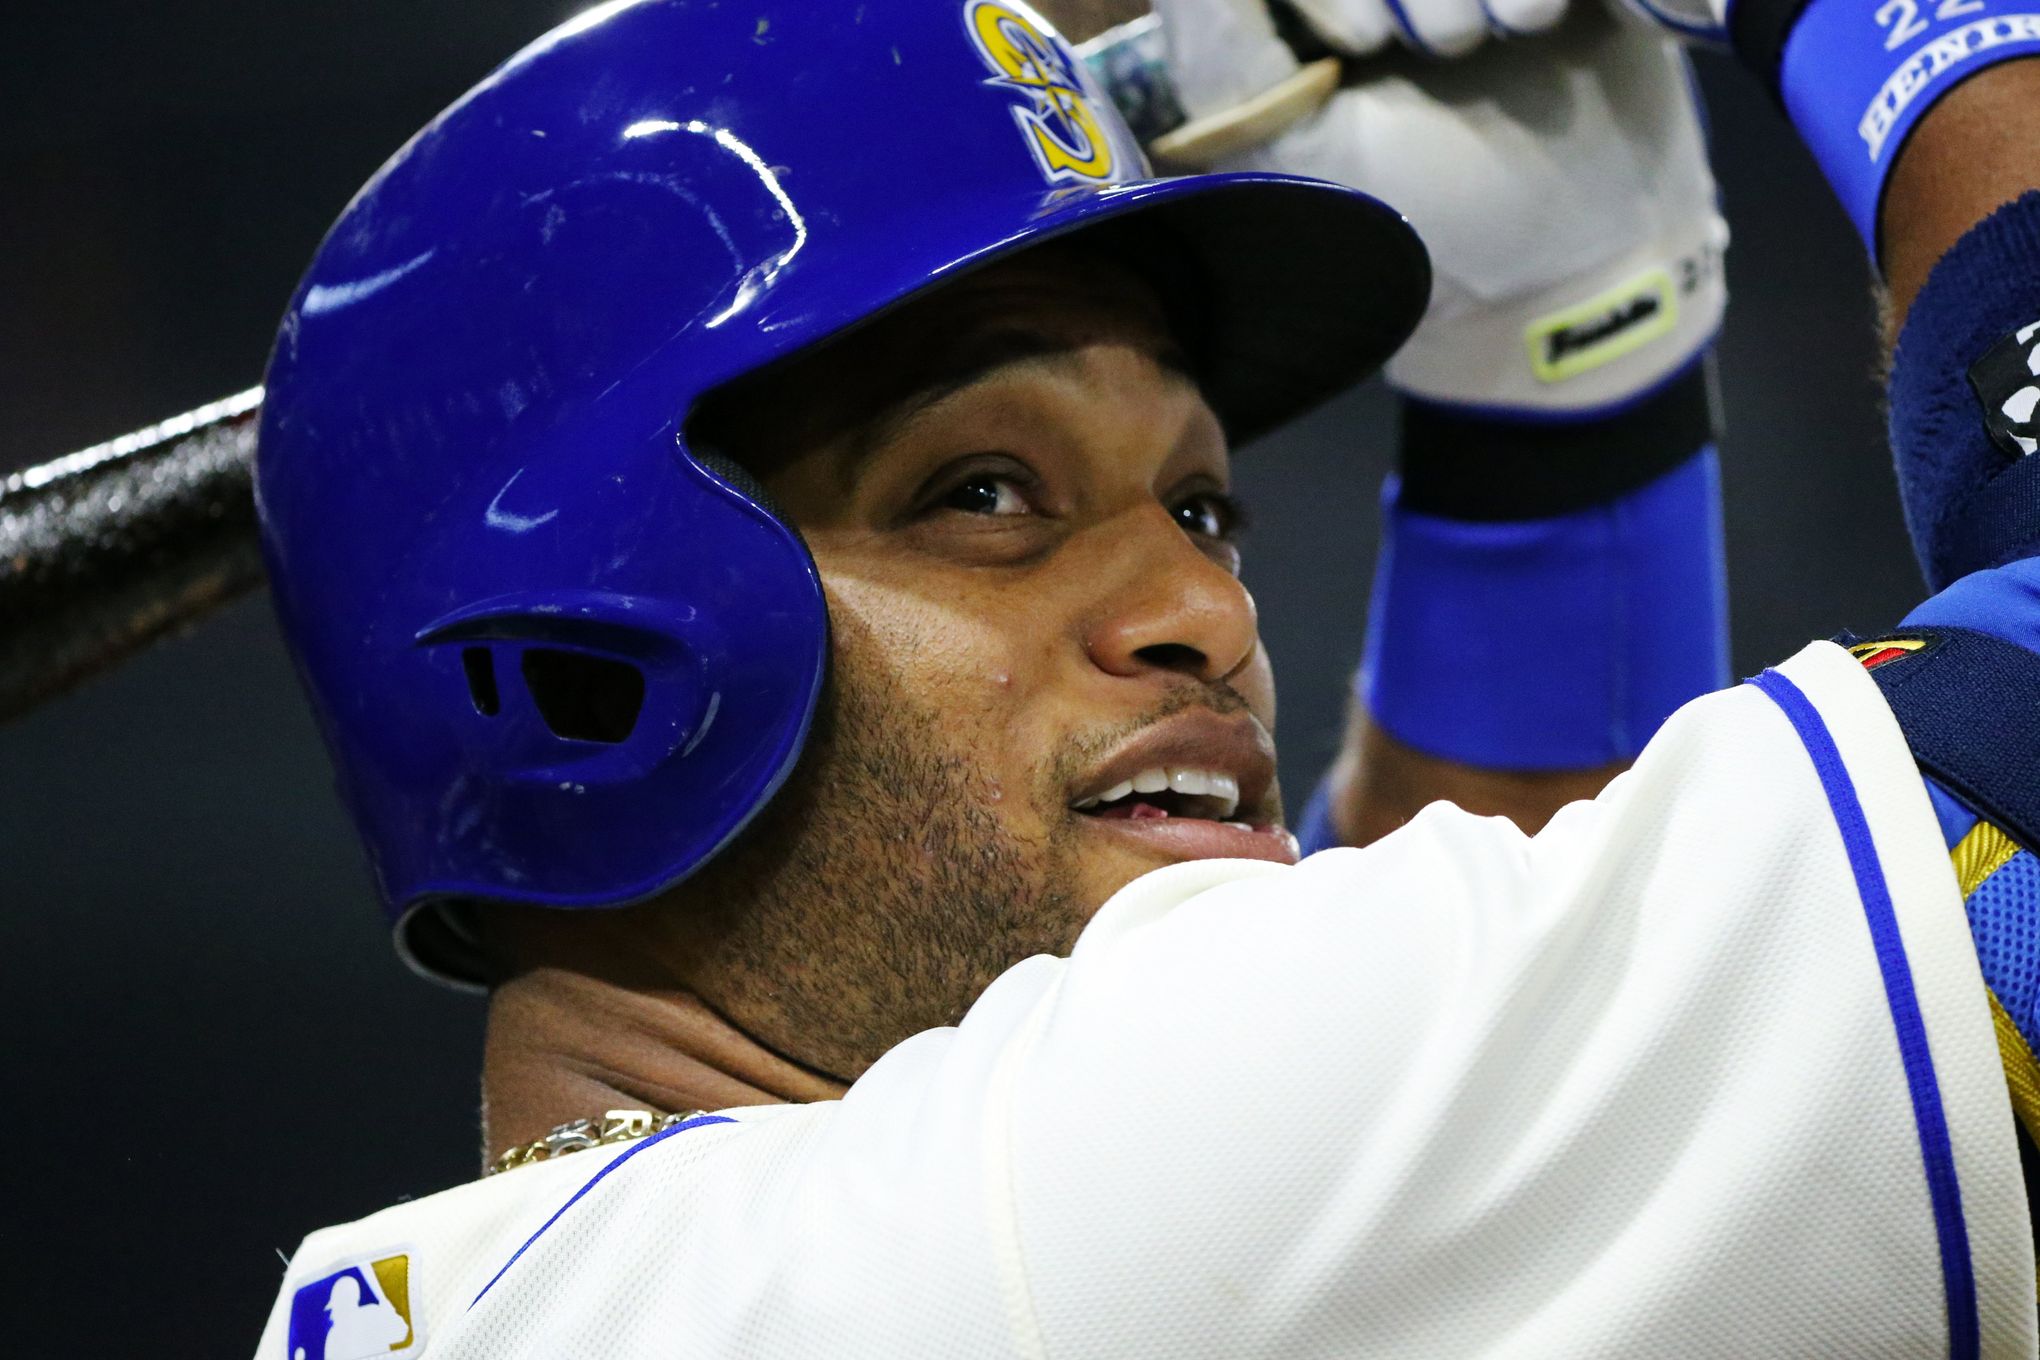 Robinson Cano injures hand in win over Blue Jays